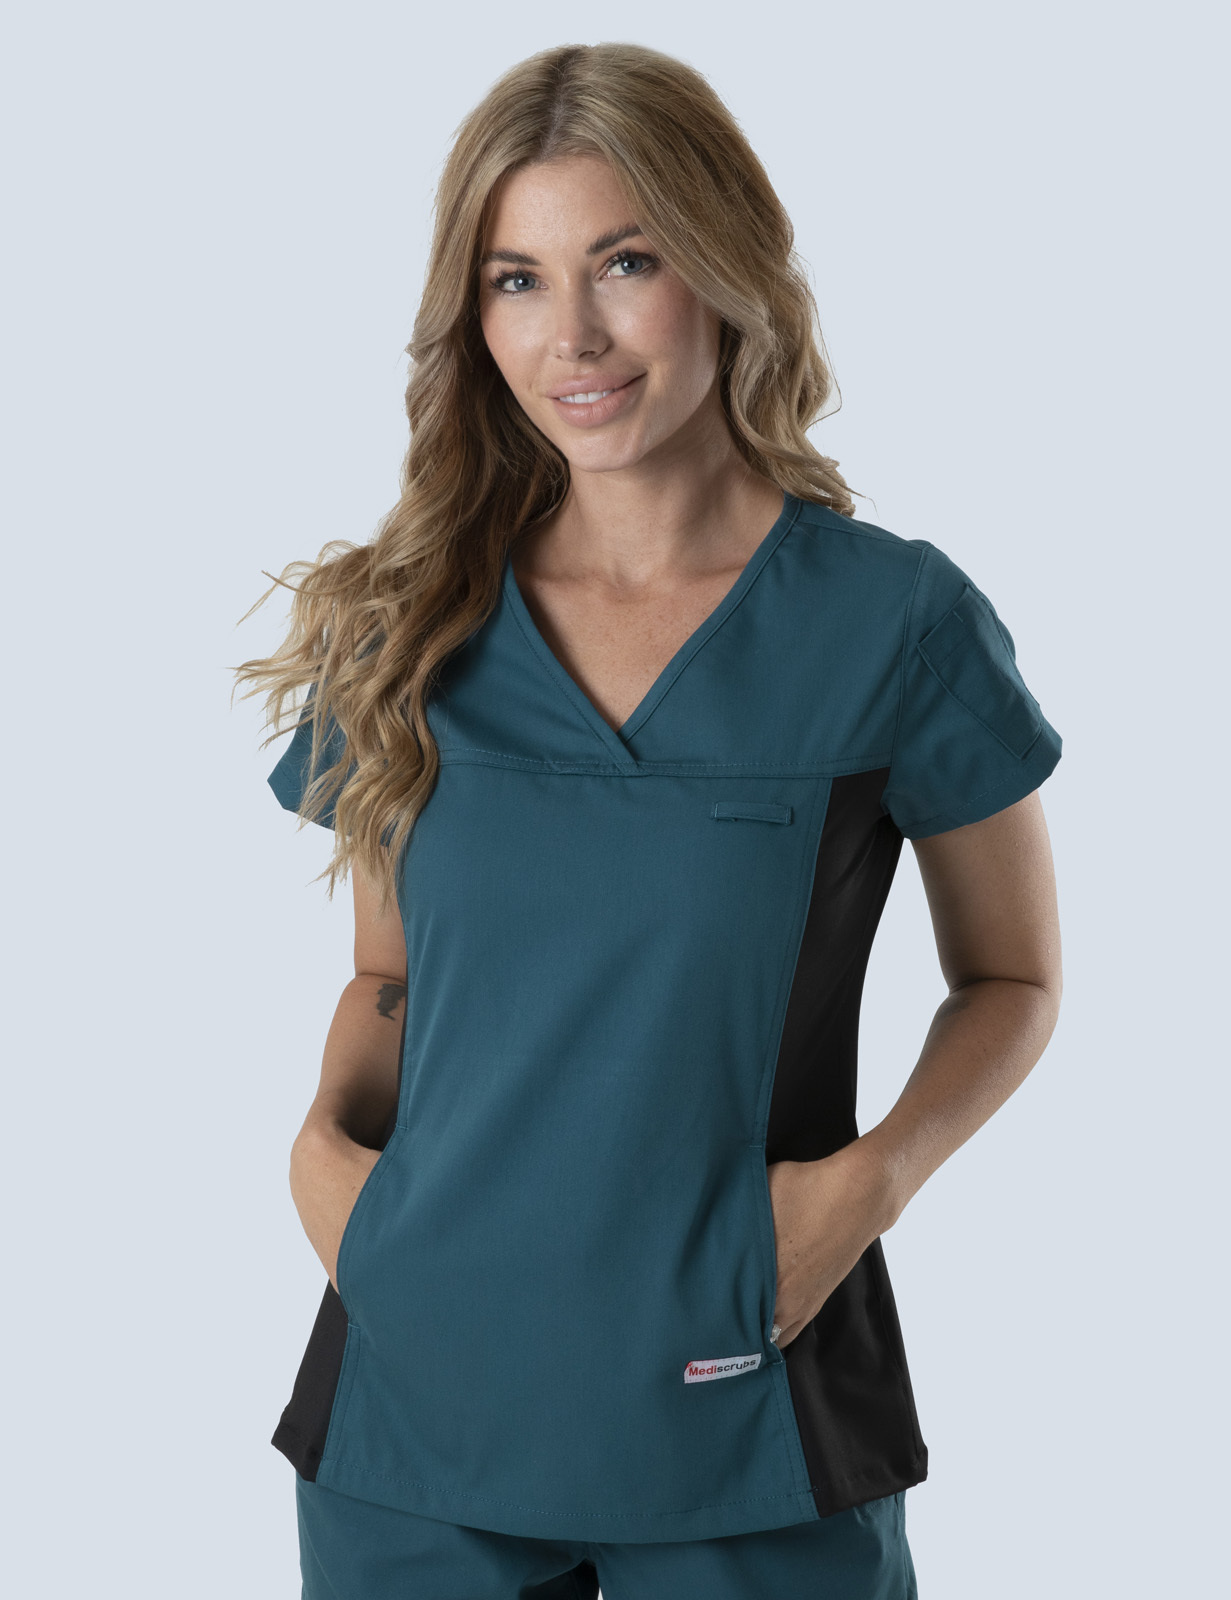 Ashmore Retreat Endorsed Enrolled Nurse Top Only Bundle (Women's Fit Spandex in Caribbean incl Logo) 